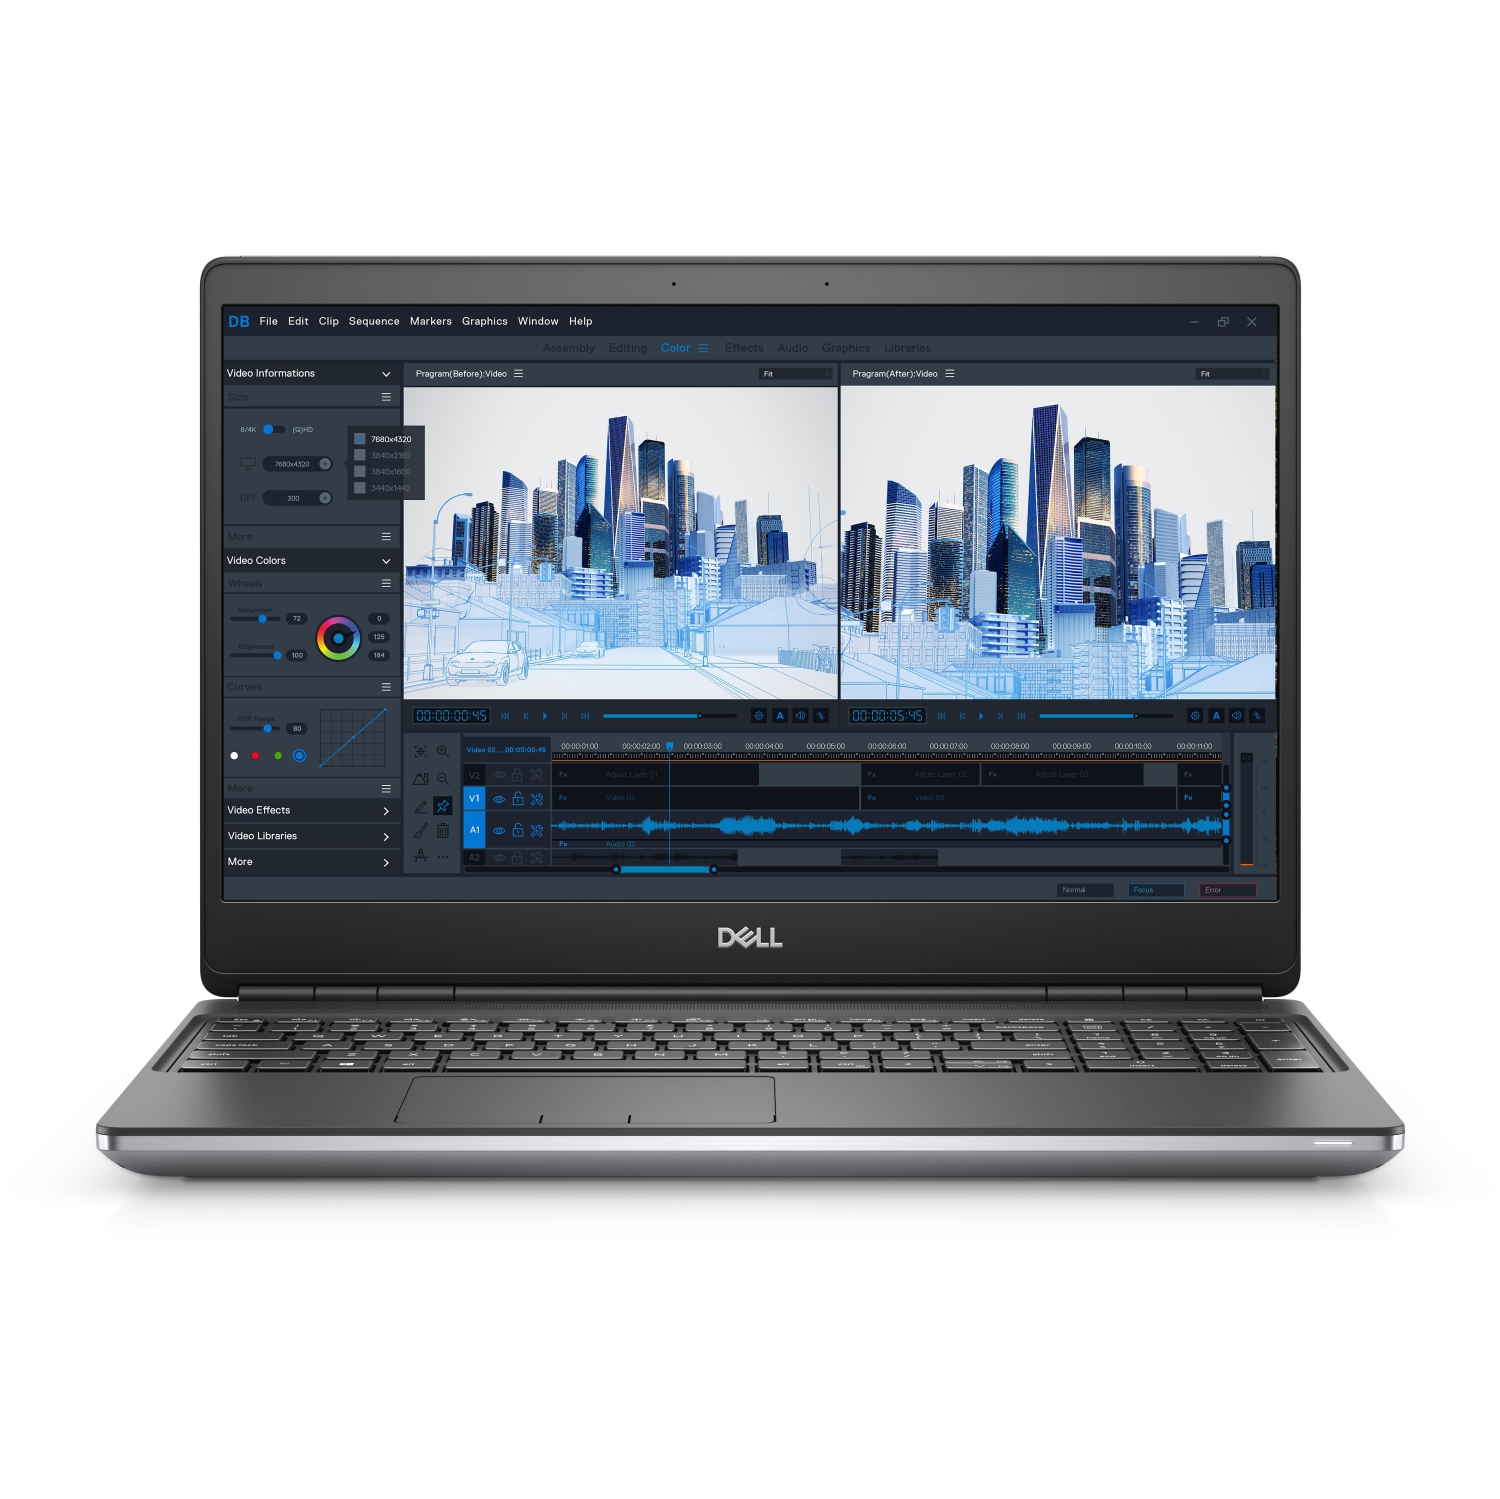 Refurbished (Excellent) - Dell Precision 7000 7560 Workstation Laptop (2021), 15.6" FHD, Core i7 - 512GB SSD - 32GB RAM - Nvidia T1200, 4.8 GHz - 11th Gen CPU Certified